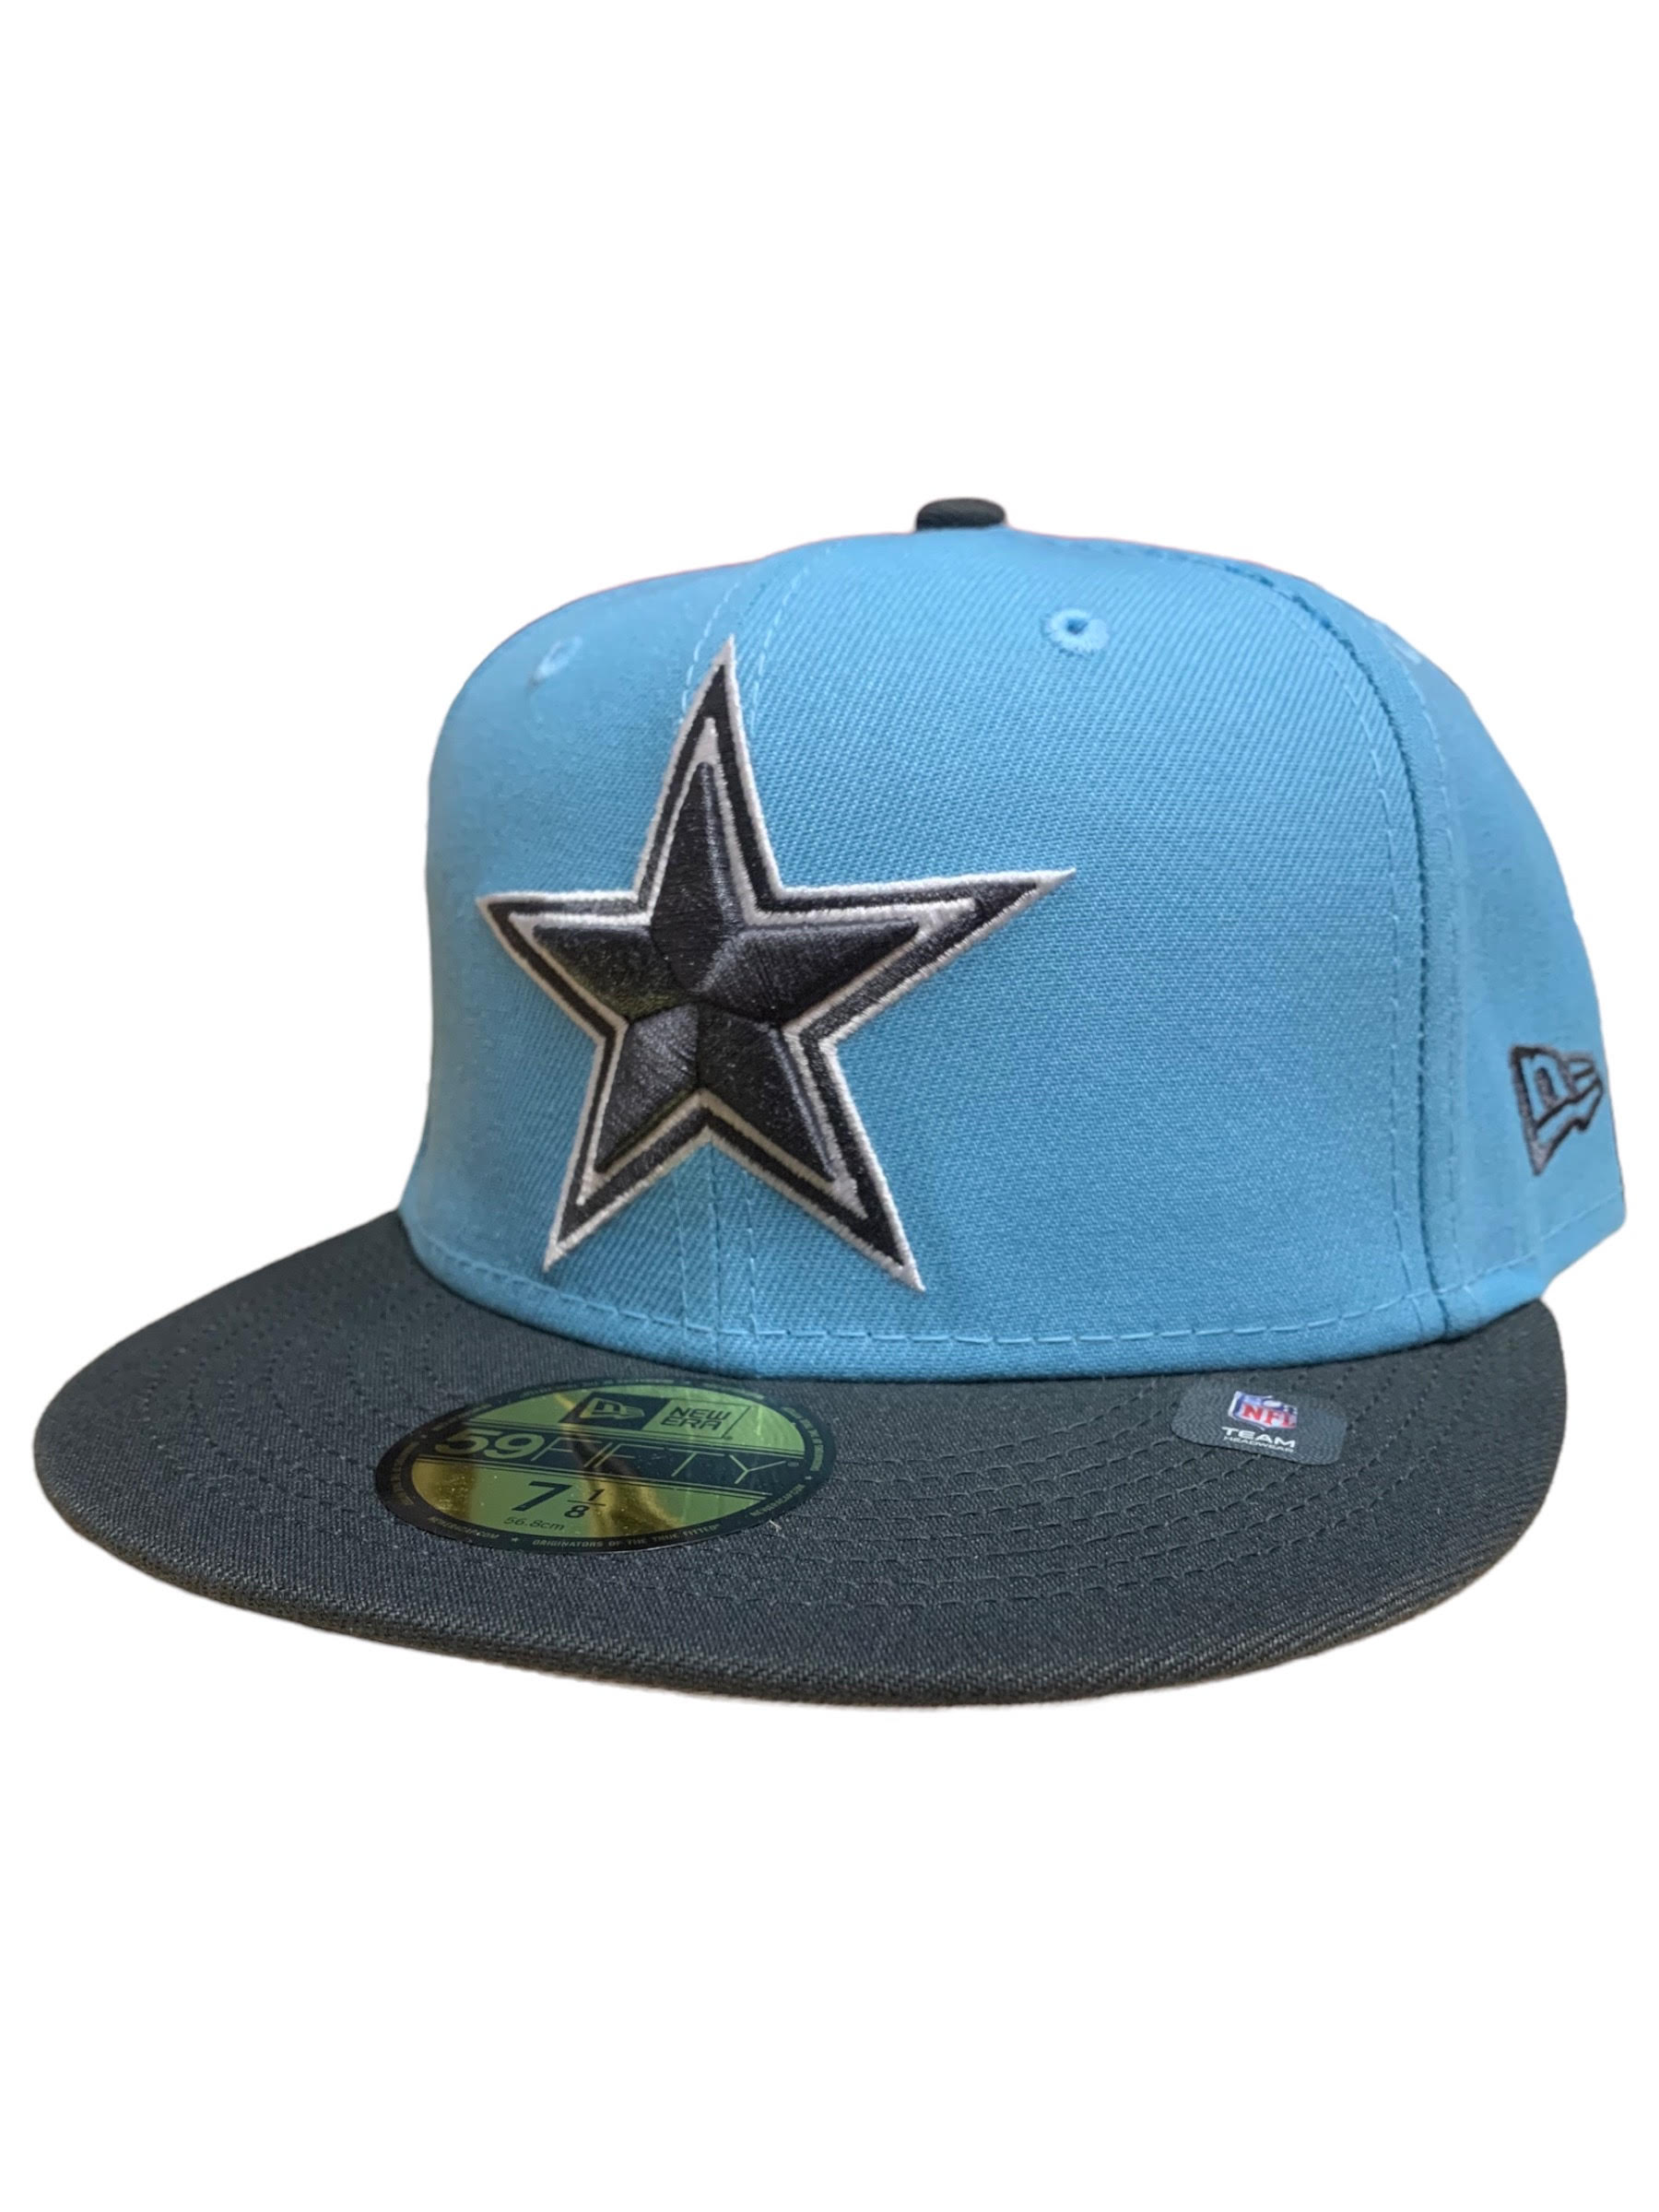 DALLAS COWBOYS 2-TONE COLOR PACK 59FIFTY FITTED HAT - LIGHT BLUE